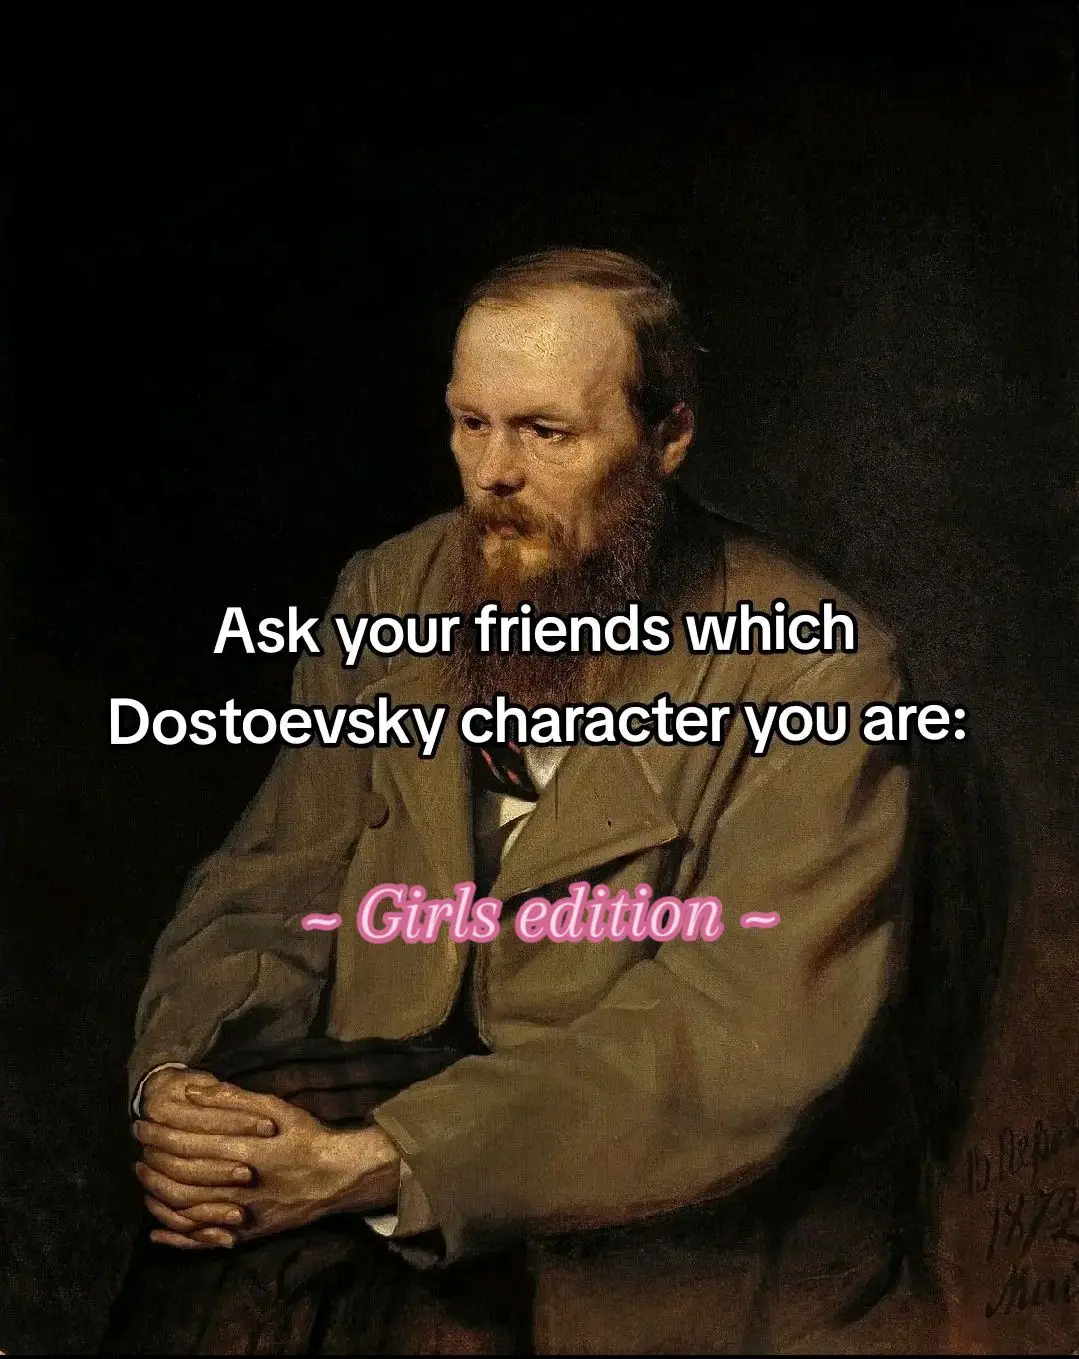 Characters from the following books: (in order) 1. White nights  2. A Gentle Creature 3. The Idiot 4. Crime and punishment  #dostoevsky #dostoevskyfyodor #crimeandpunishment #russianliterature #russianliteraturememes #raskolnikov #notesfromunderground #literallyme #literature #BookTok #book #fyp #foryoupage #whitenightsdostoyevsky #whitenights #fakegun 